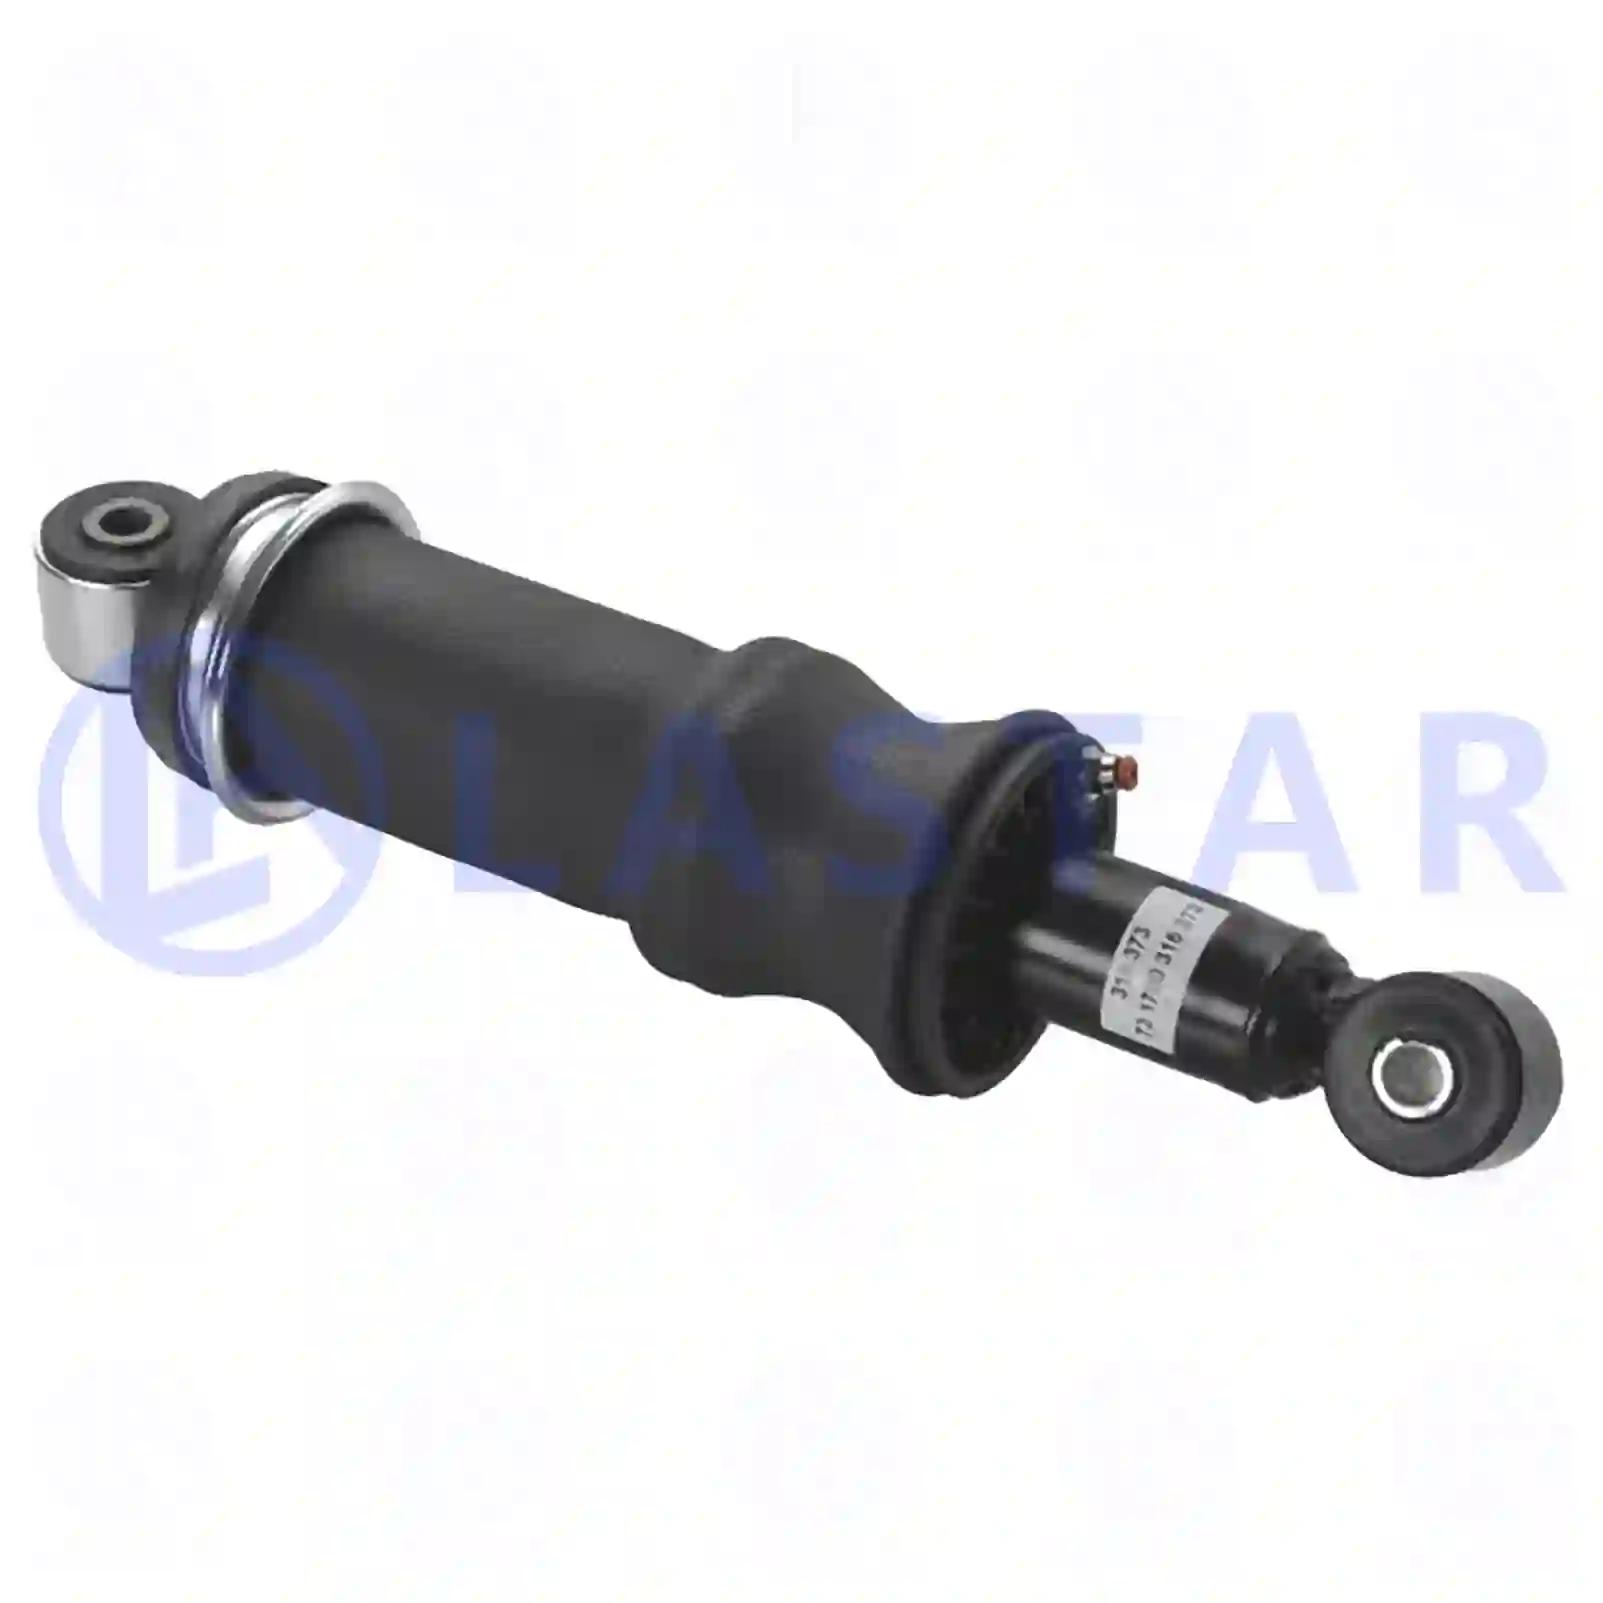 Cabin shock absorber, with air bellow, 77735738, 1076855, 20427879, 20427897, 20721169, 20775212, 20889134, 21651231, 22144200, 3172985, ZG41215-0008 ||  77735738 Lastar Spare Part | Truck Spare Parts, Auotomotive Spare Parts Cabin shock absorber, with air bellow, 77735738, 1076855, 20427879, 20427897, 20721169, 20775212, 20889134, 21651231, 22144200, 3172985, ZG41215-0008 ||  77735738 Lastar Spare Part | Truck Spare Parts, Auotomotive Spare Parts